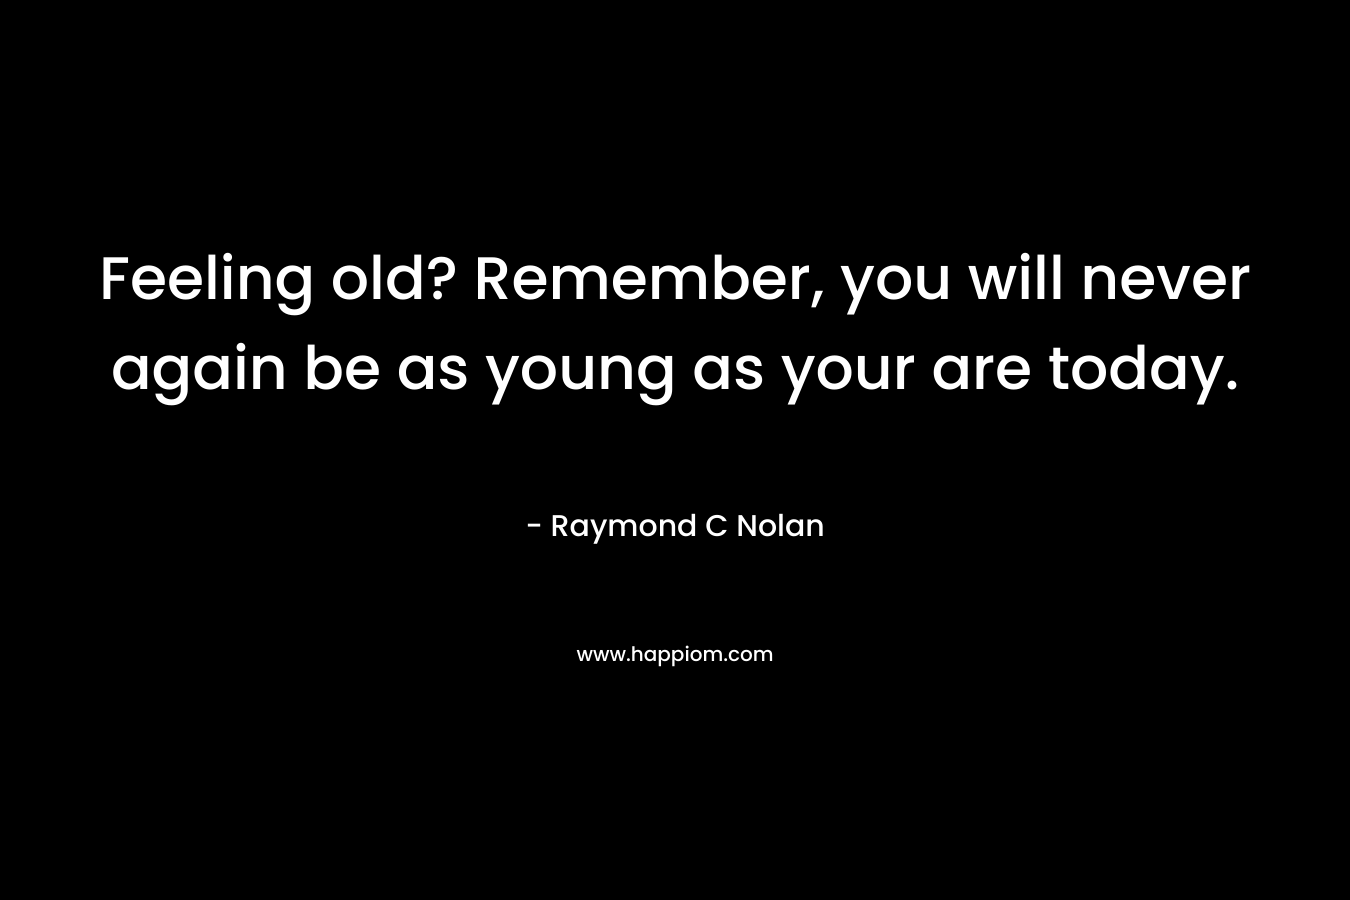 Feeling old? Remember, you will never again be as young as your are today. – Raymond C Nolan